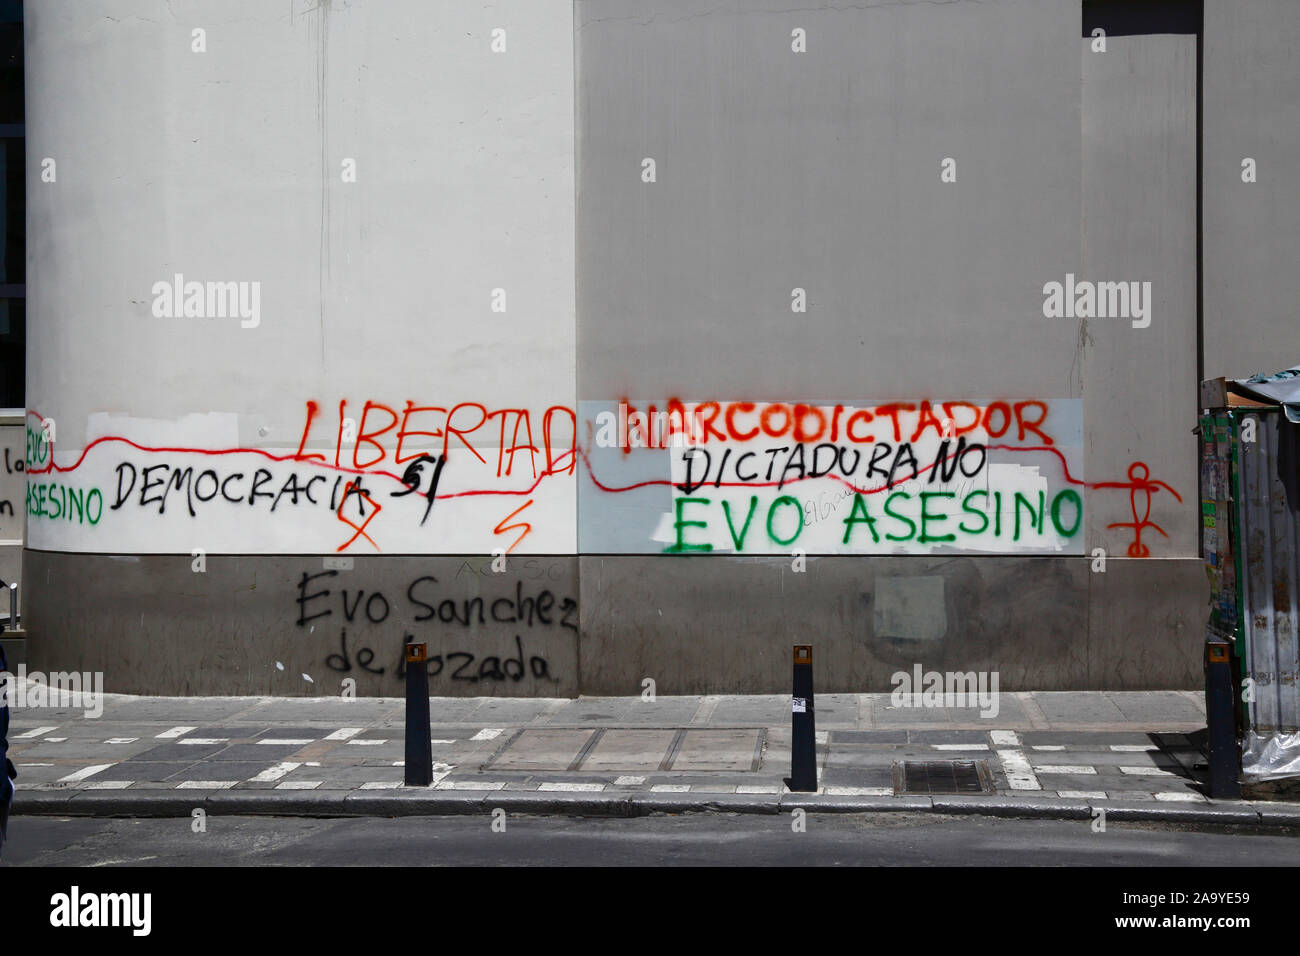 La Paz, Bolivia, 18th October 2019. 'Democracy. Liberty. Narco dictator, No dictatorship, Evo killer, Evo Sanchez de Lozada' graffiti on wall of building in central La Paz. Bolivia held presidential elections on 20th October, a subsequent investigation by the OAS confirmed a large number of irregularities and president Evo Morales resigned on 10th November. Stock Photo